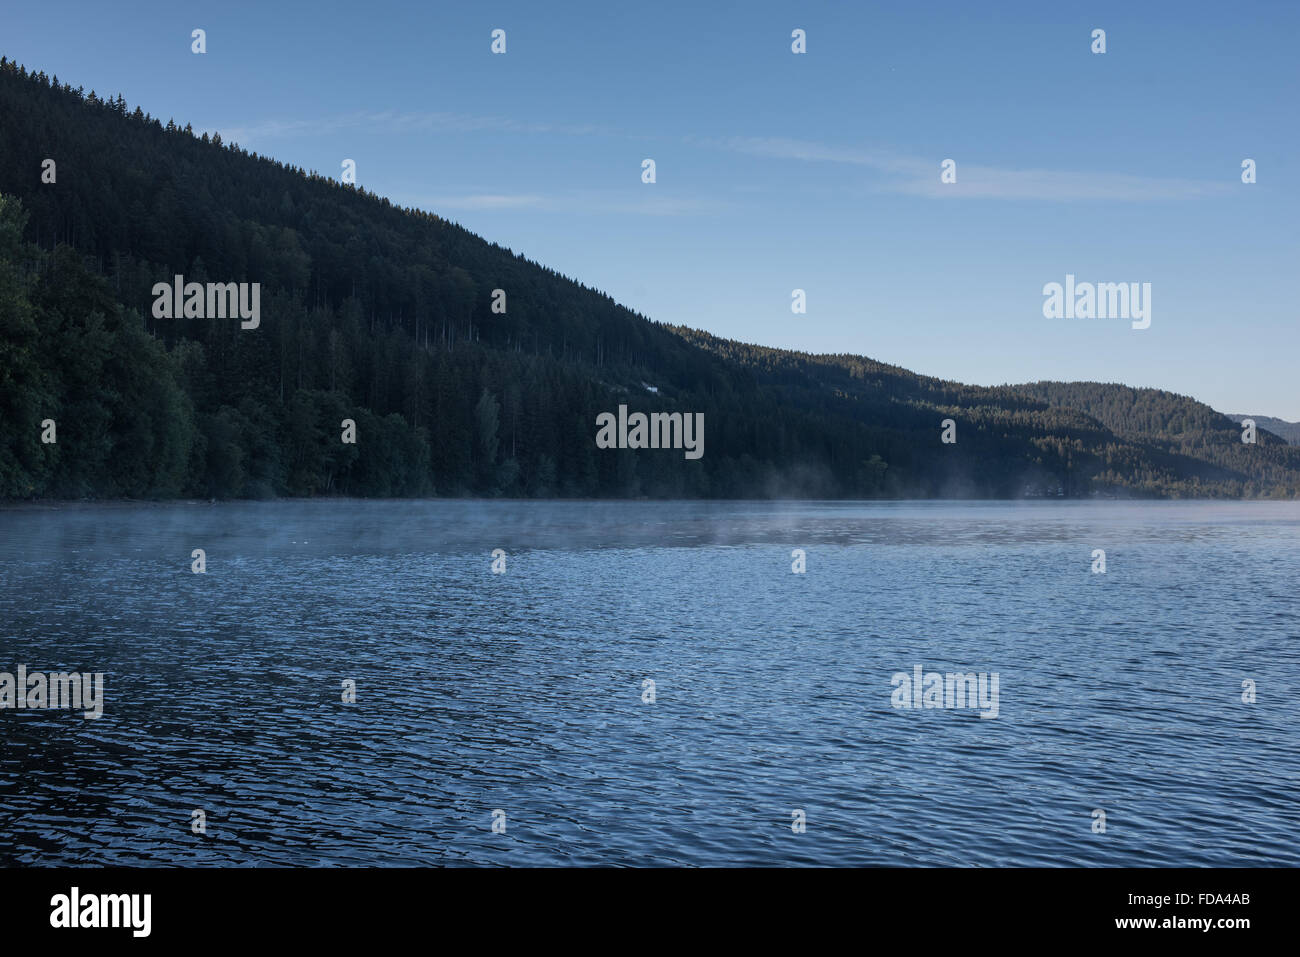 08.20.2015, Titisee, Impressions, Black Forest Stock Photo